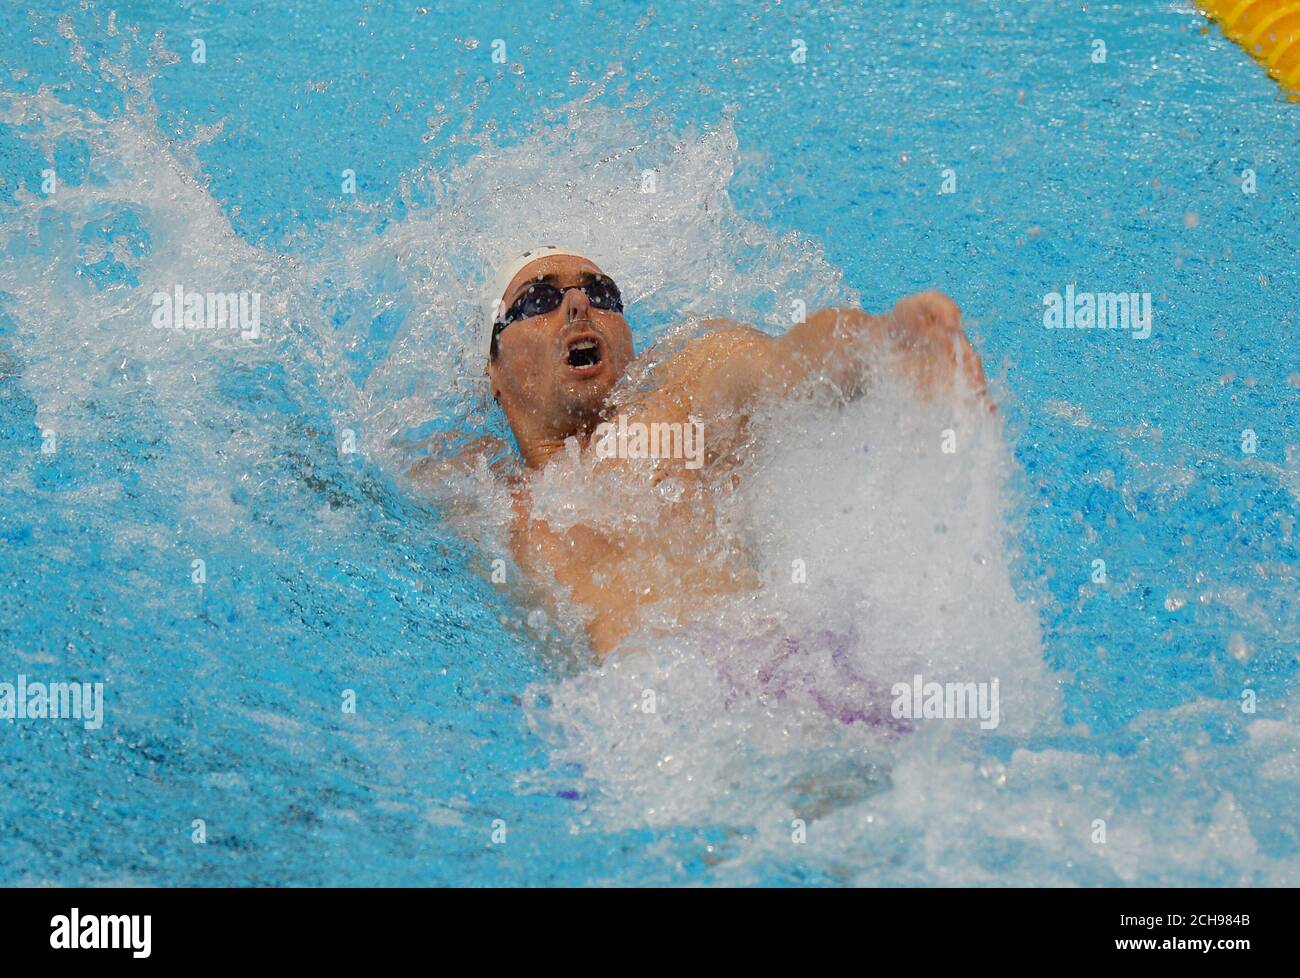 France's Camille Lacourt competes in the Men's 50m Backstroke heats during day ten of the European Aquatics Championships at the London Aquatics Centre, Stratford. Stock Photo